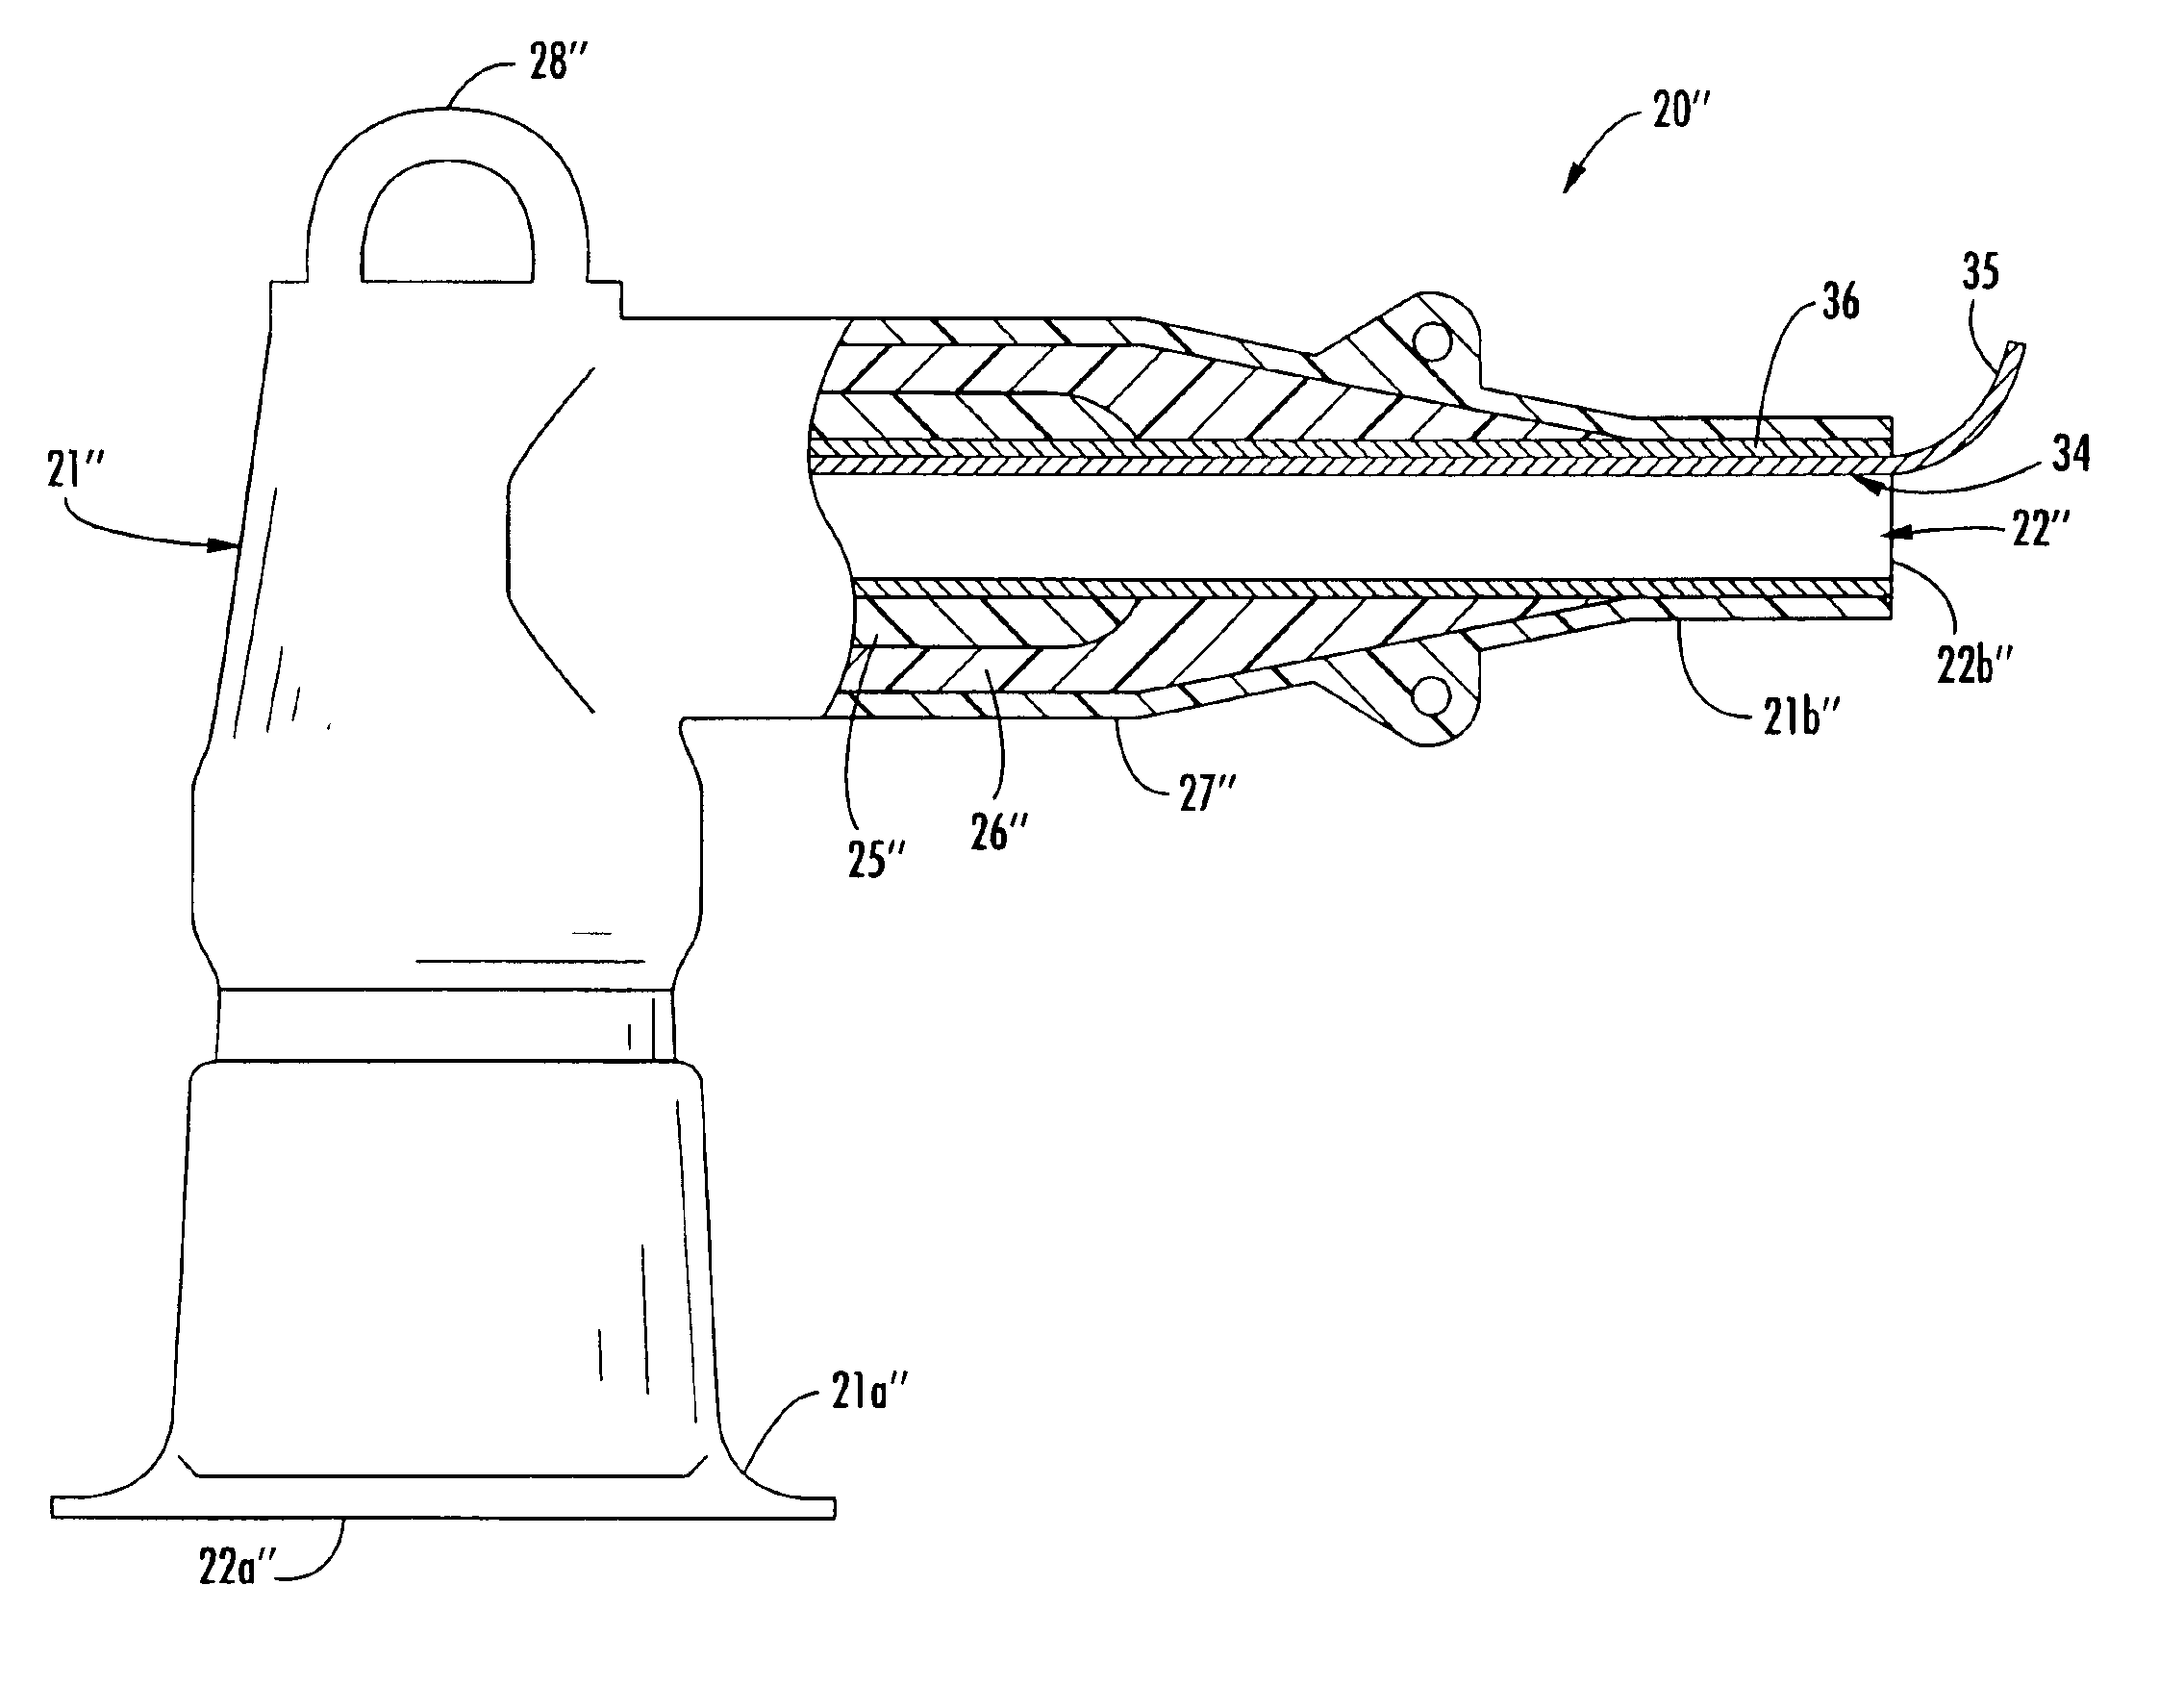 Electrical connector including thermoplastic elastomer material and associated methods